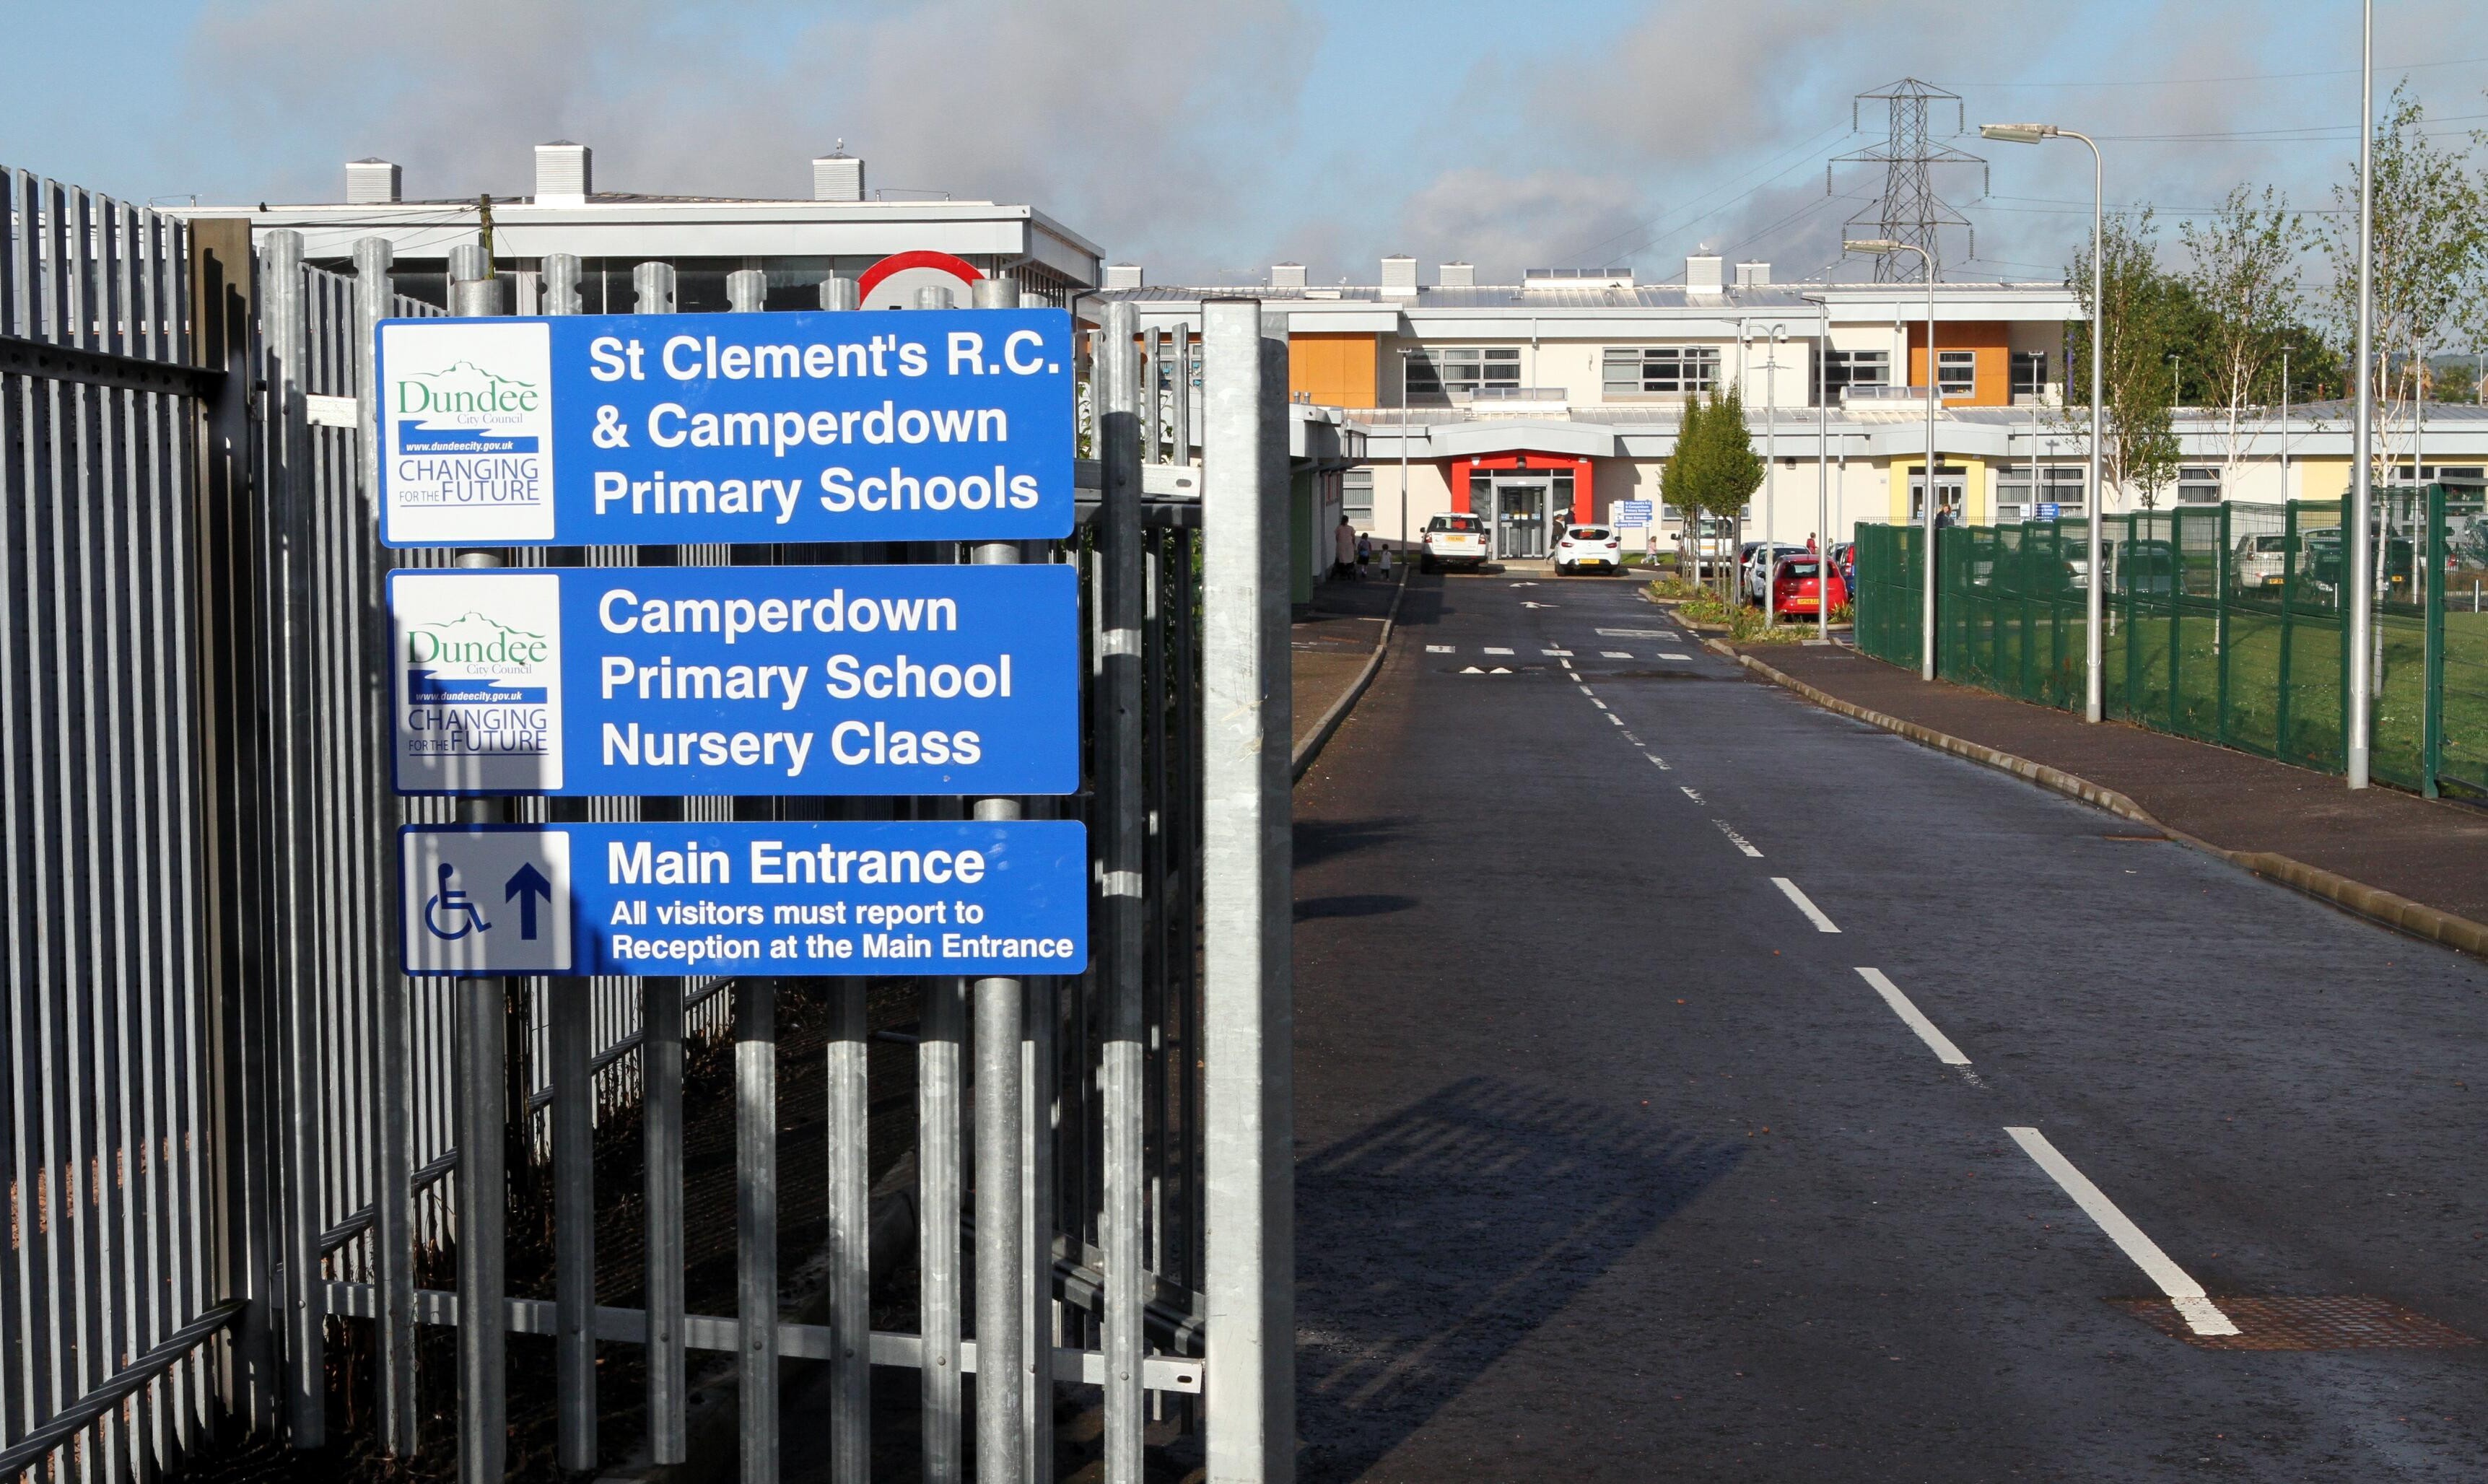 The entrance to St Clement's and Camperdown primary schools in Dundee, where the knife threat incident took place.